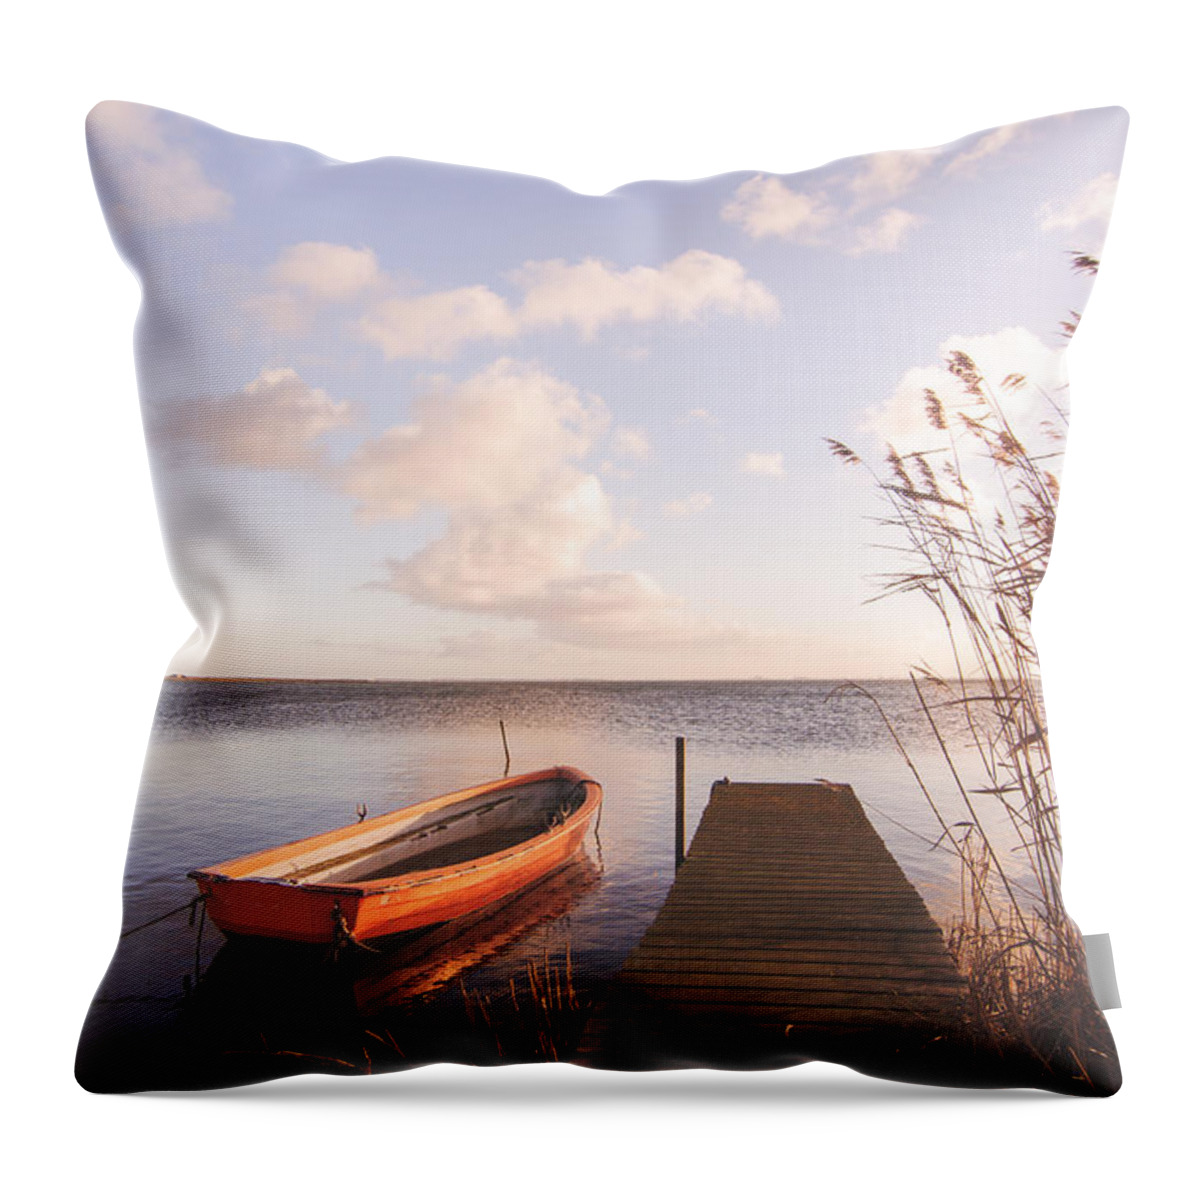 Blue Throw Pillow featuring the photograph Golden by Marcus Karlsson Sall